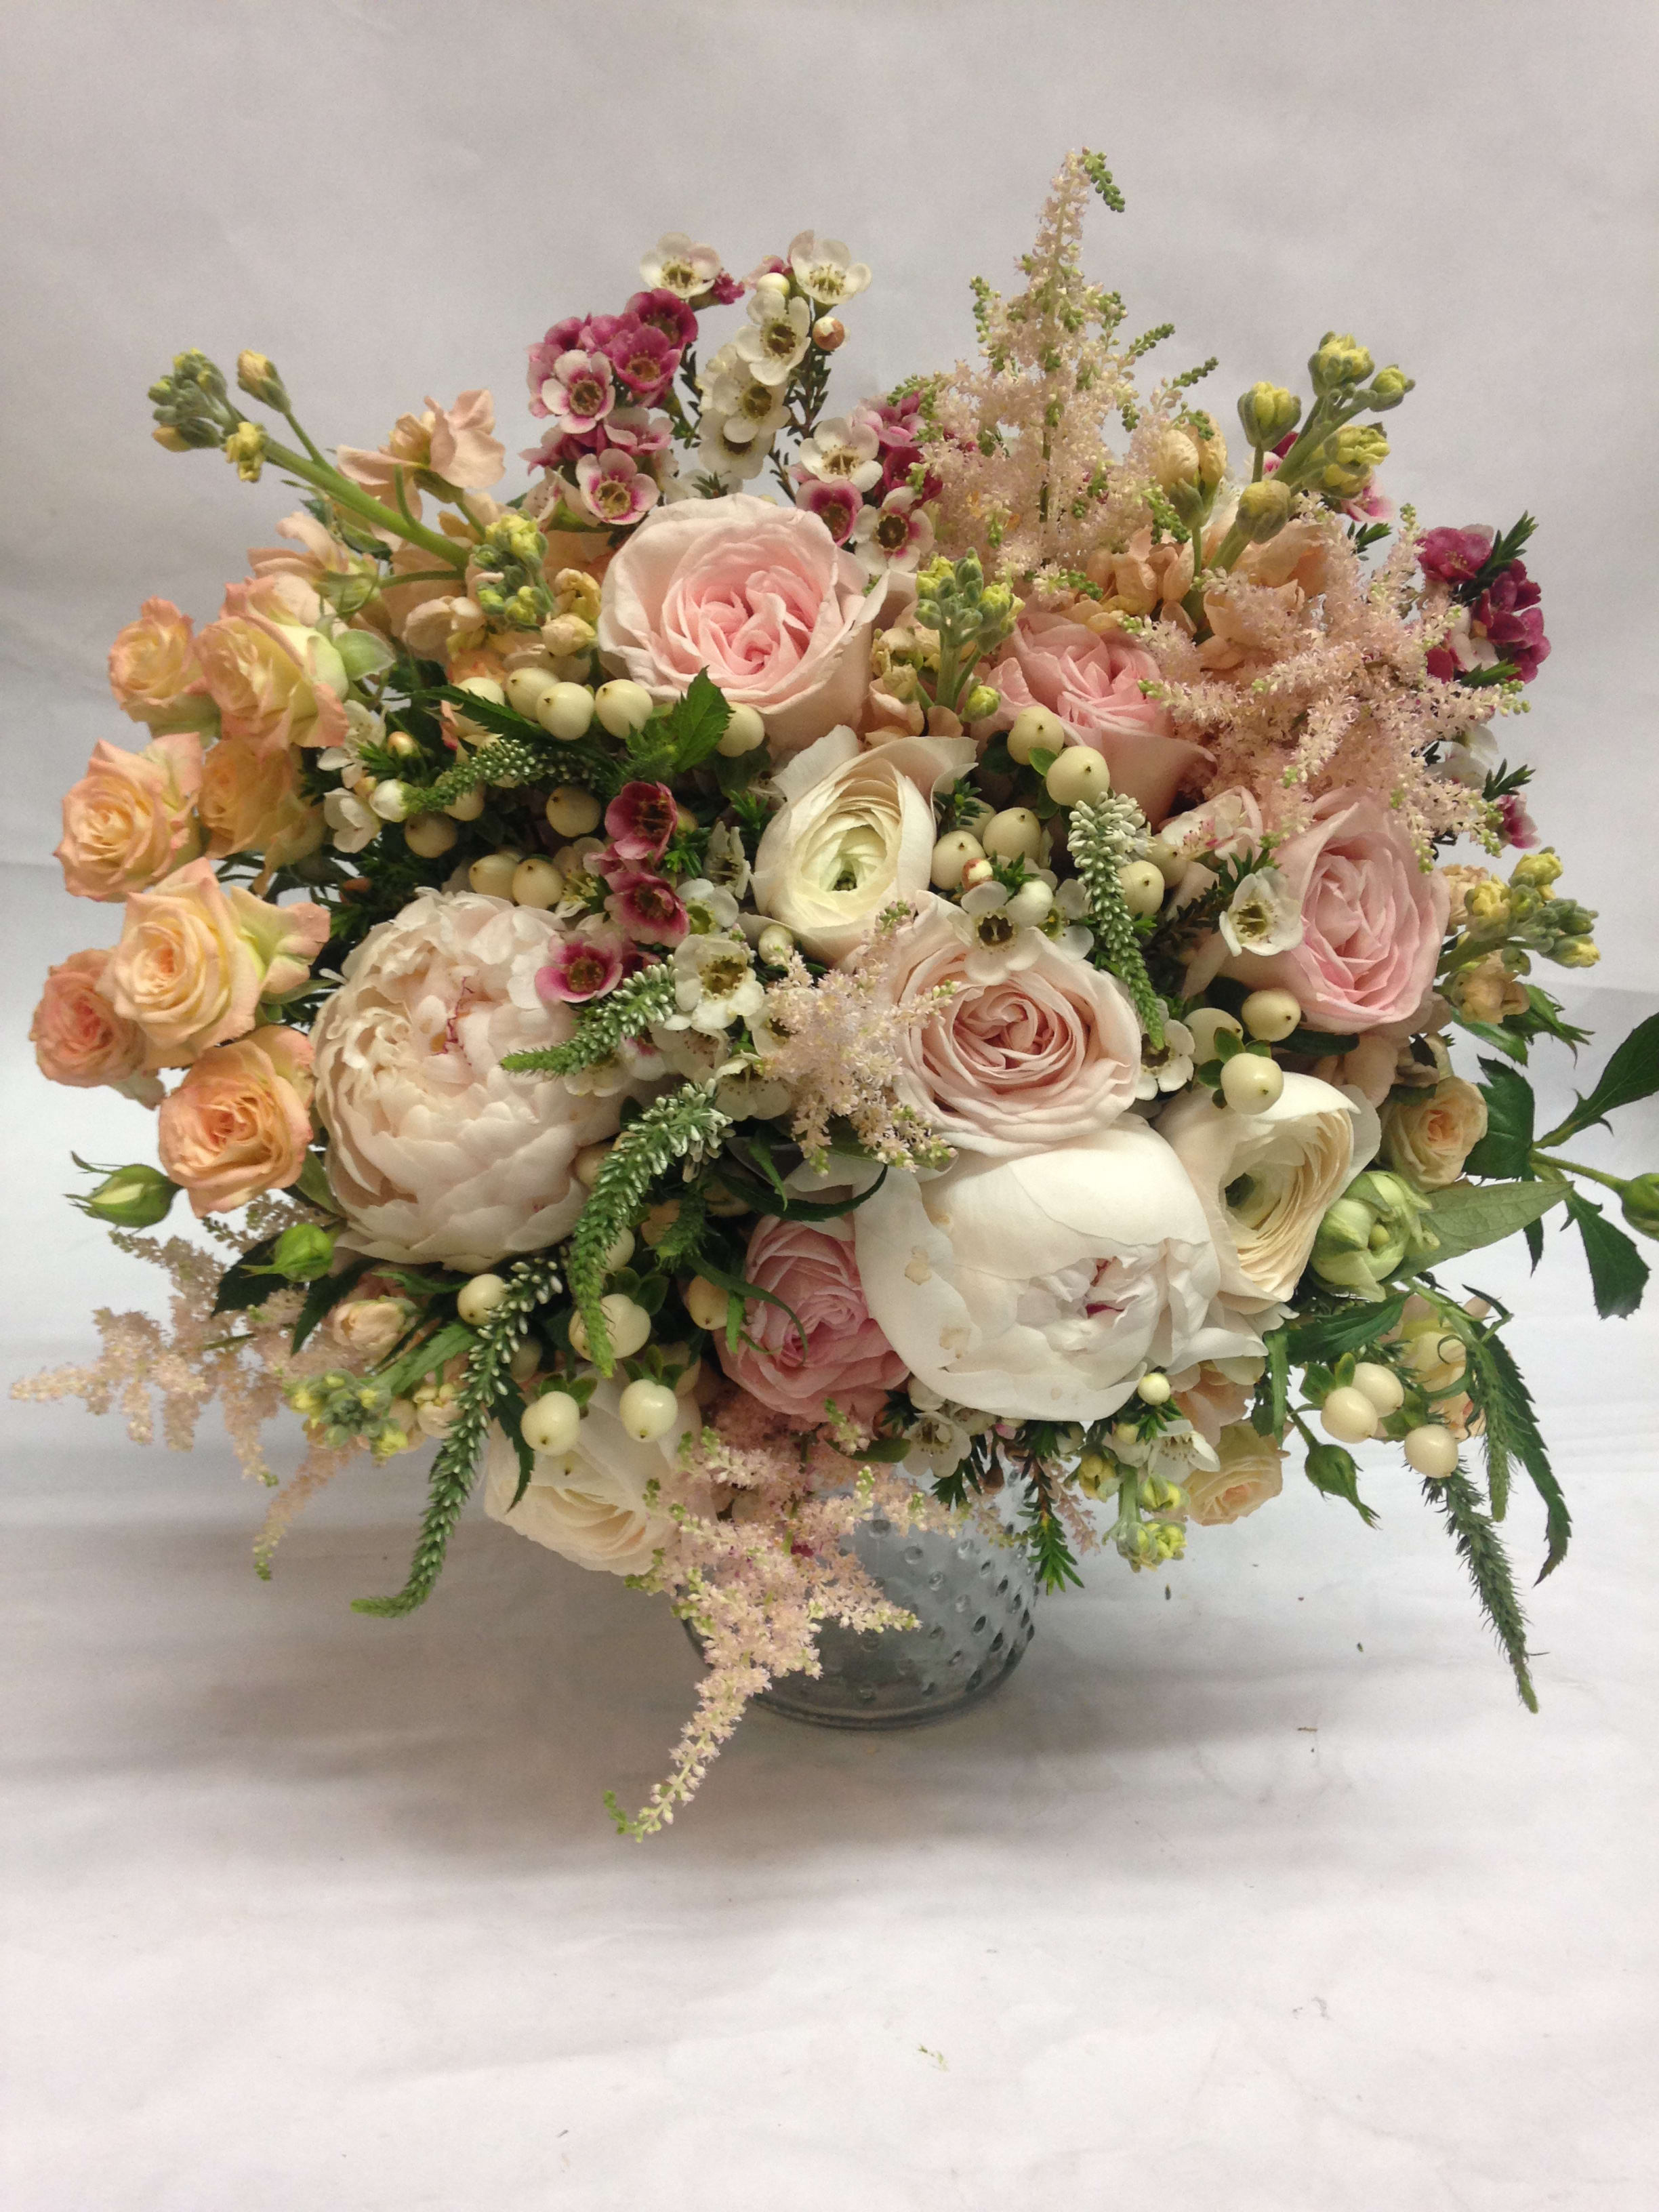 Precious and Pastel Bridal Bouquet by Flowers of the Valley